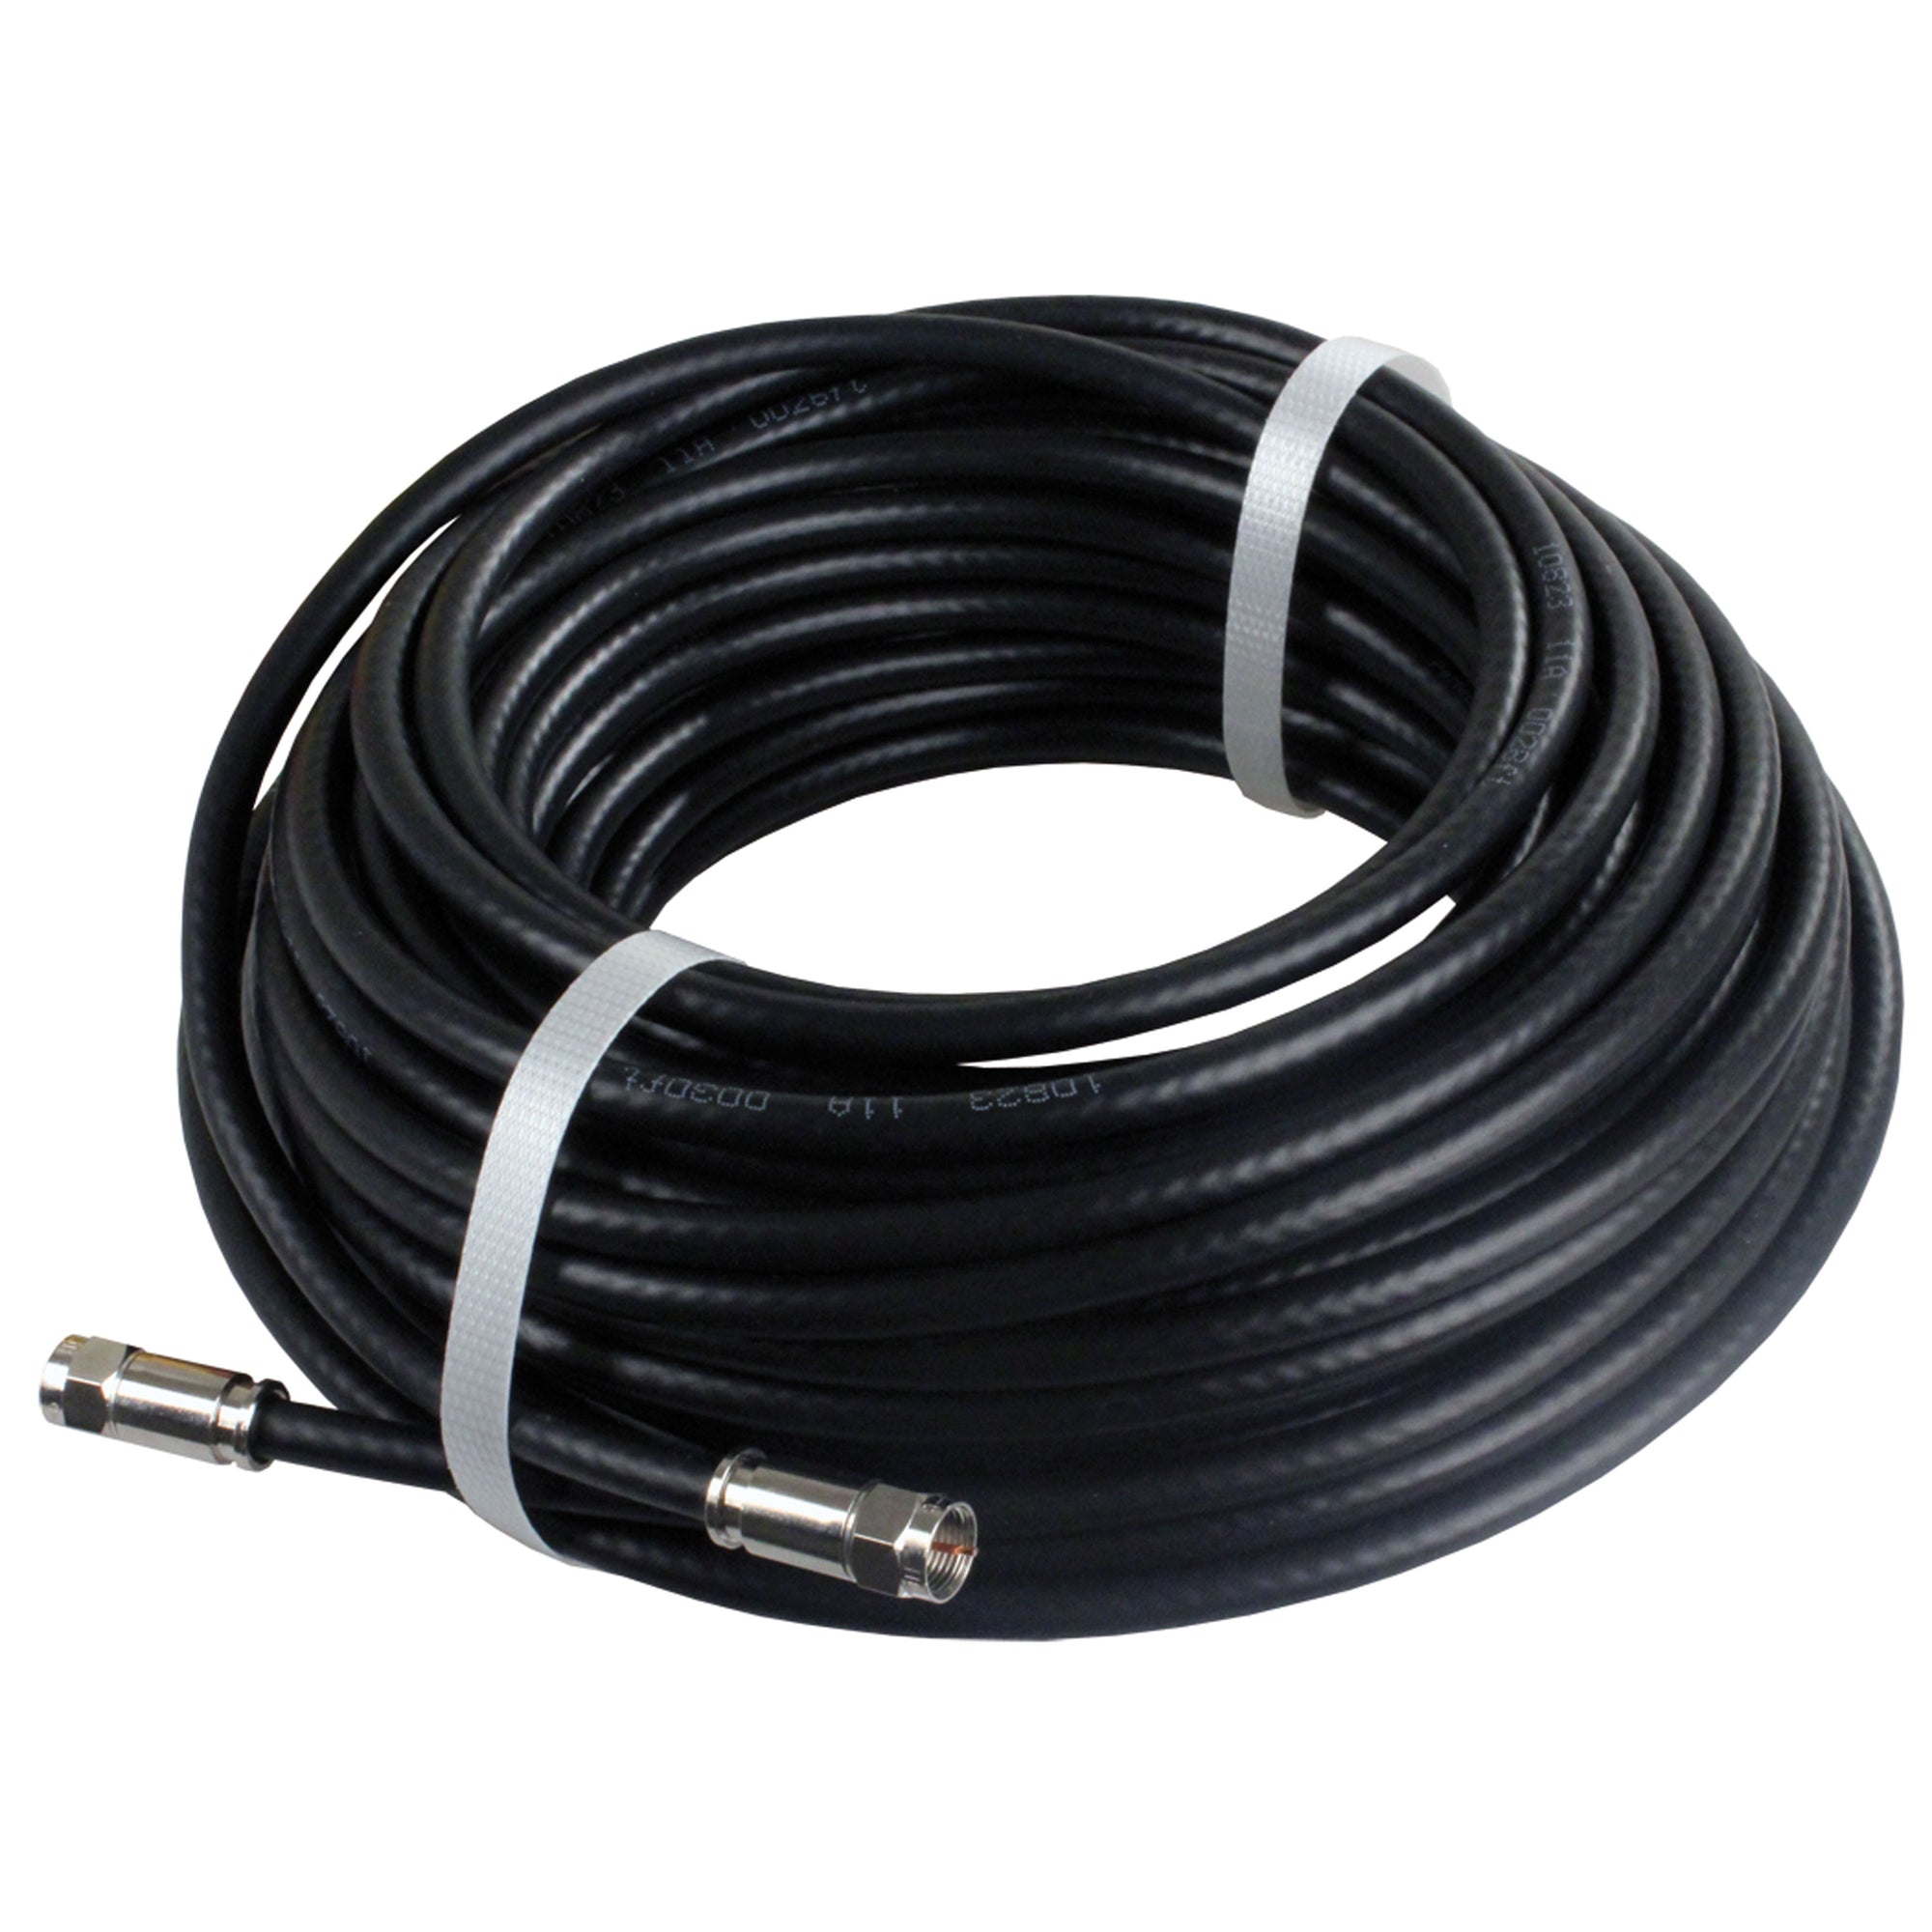 JR Products 47995 RG6 Exterior HD/Satellite Cable - 75'